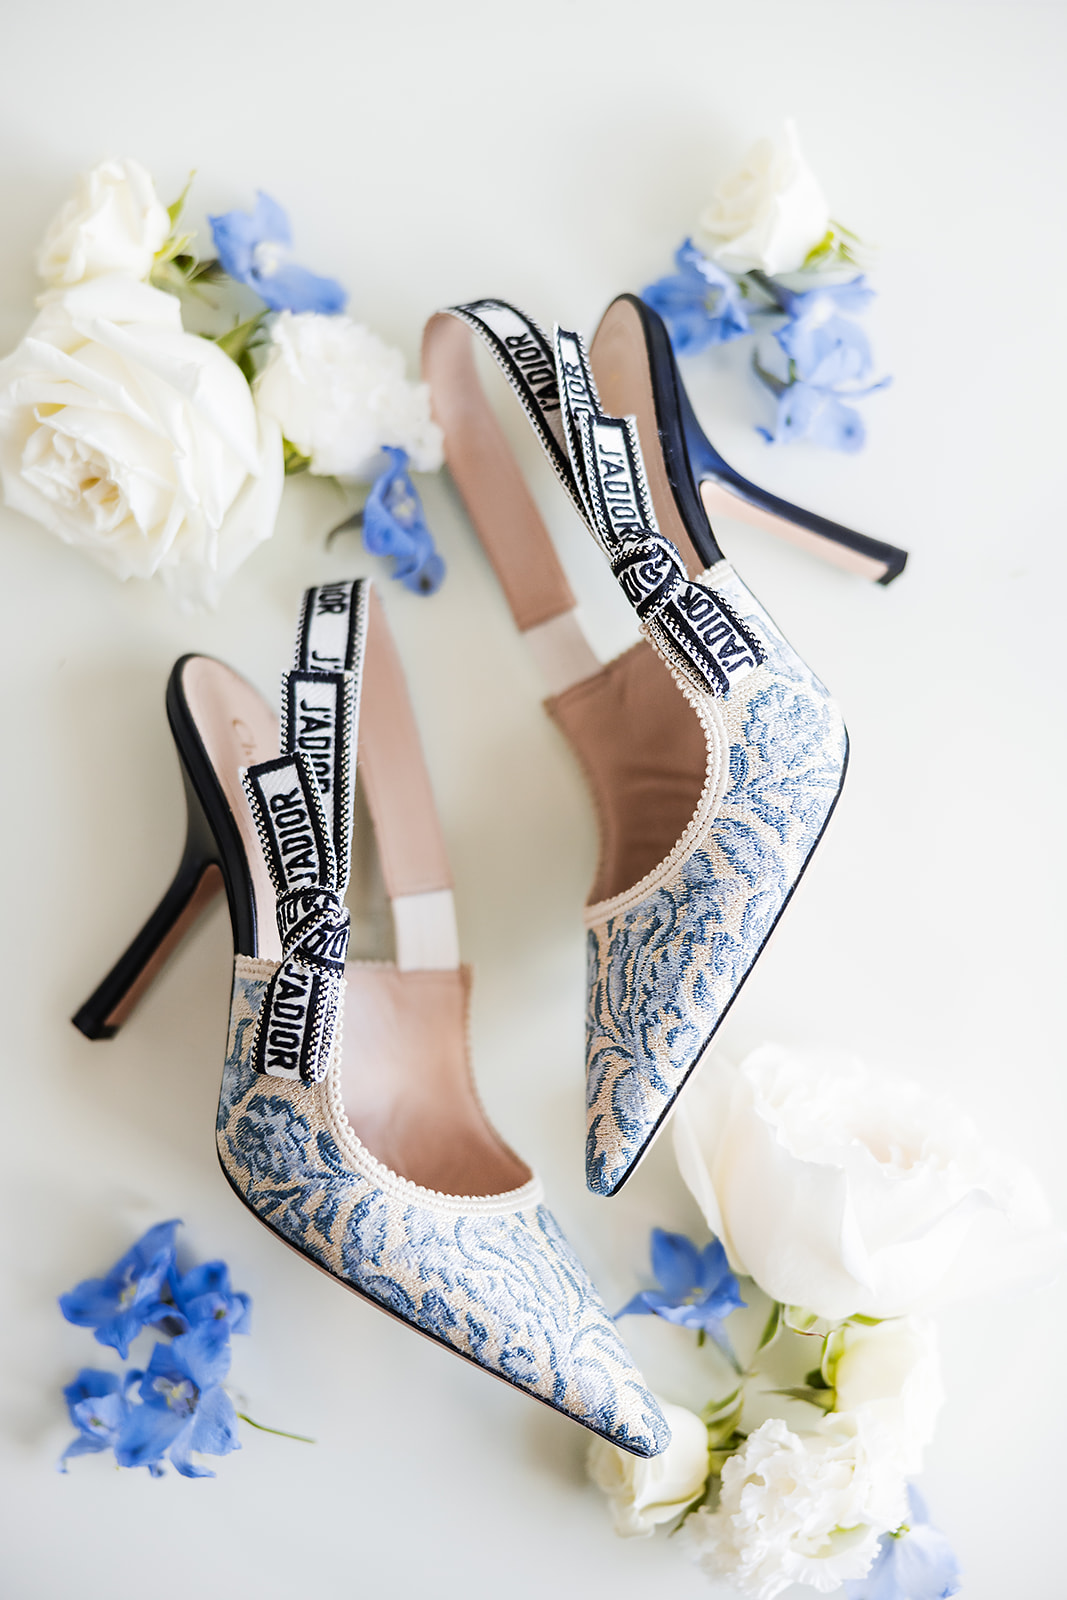 DiorJ'ADIOR SLINGBACK PUMP in blue and white with black heel bridal